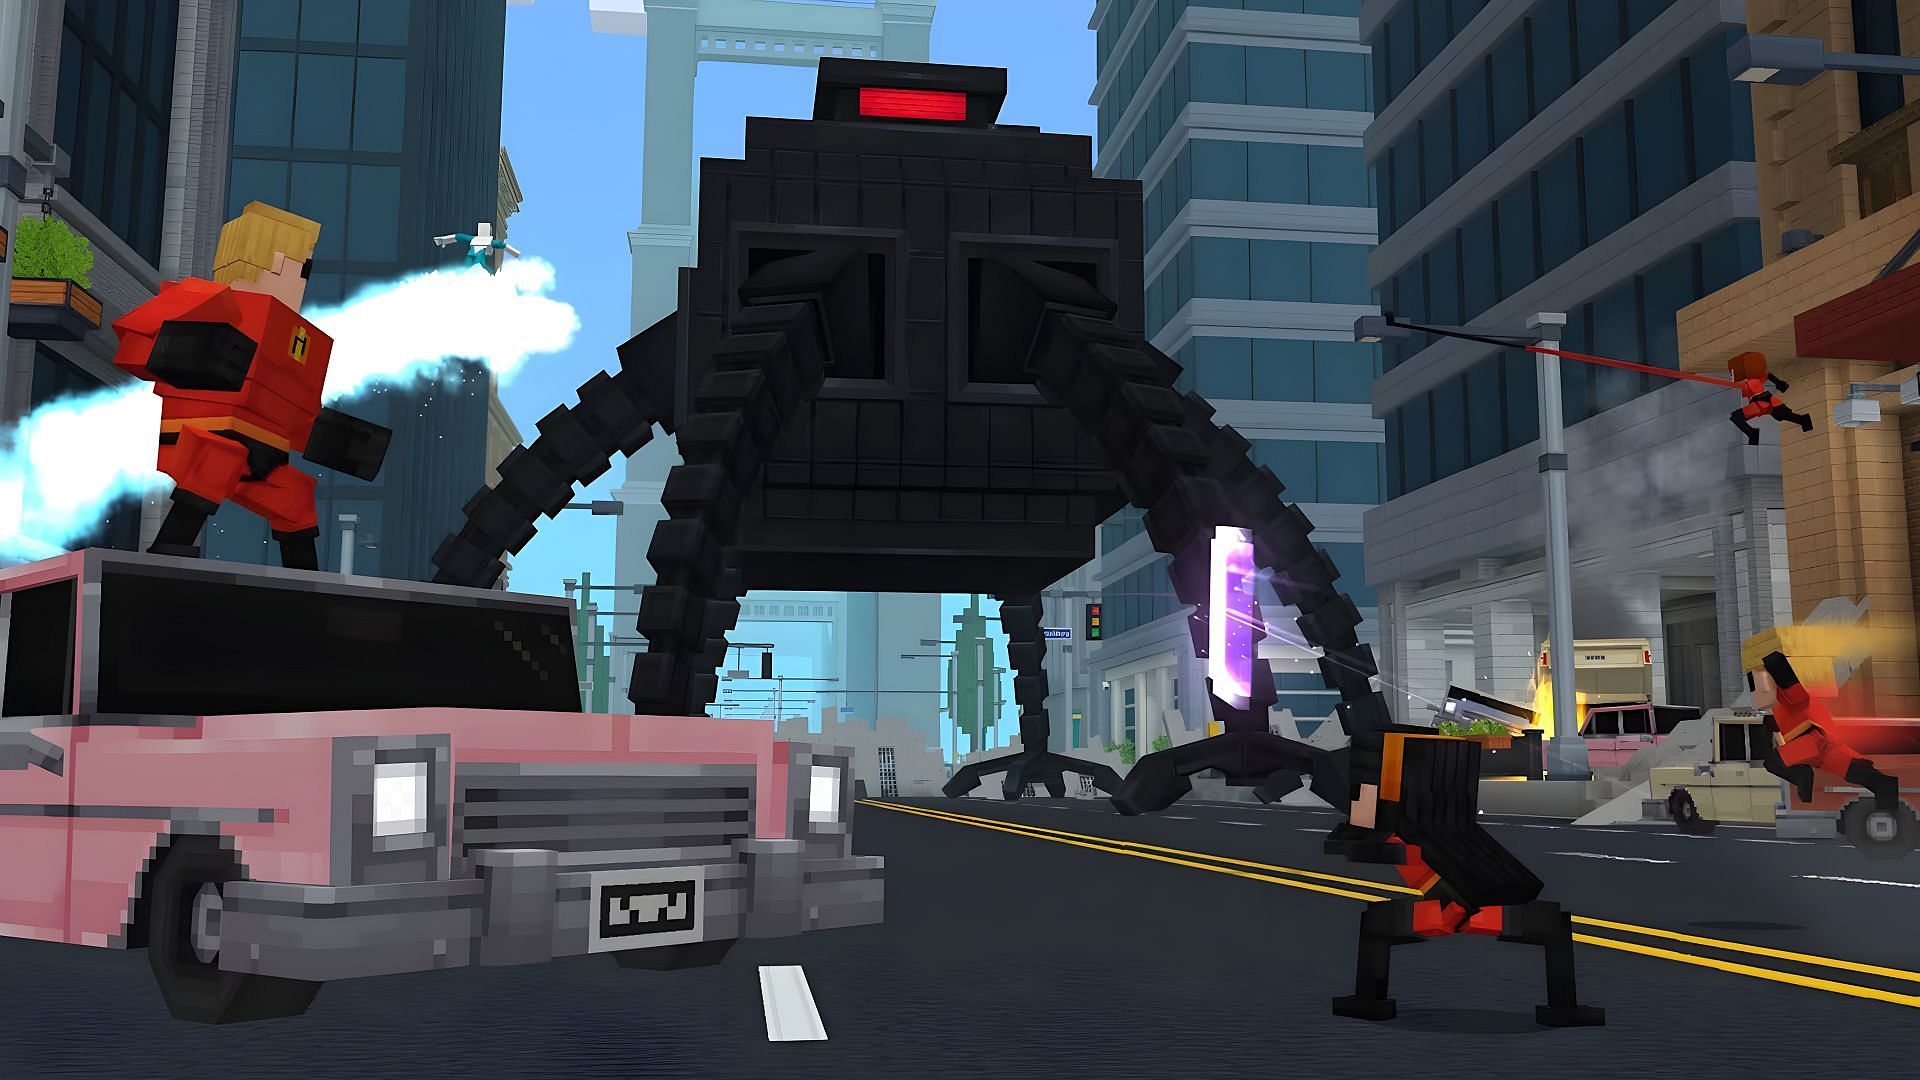 The Incredibles and Frozone battle an Omnidroid in Minecraft&#039;s latest crossover DLC (Image via Mojang/Disney/Pixar)